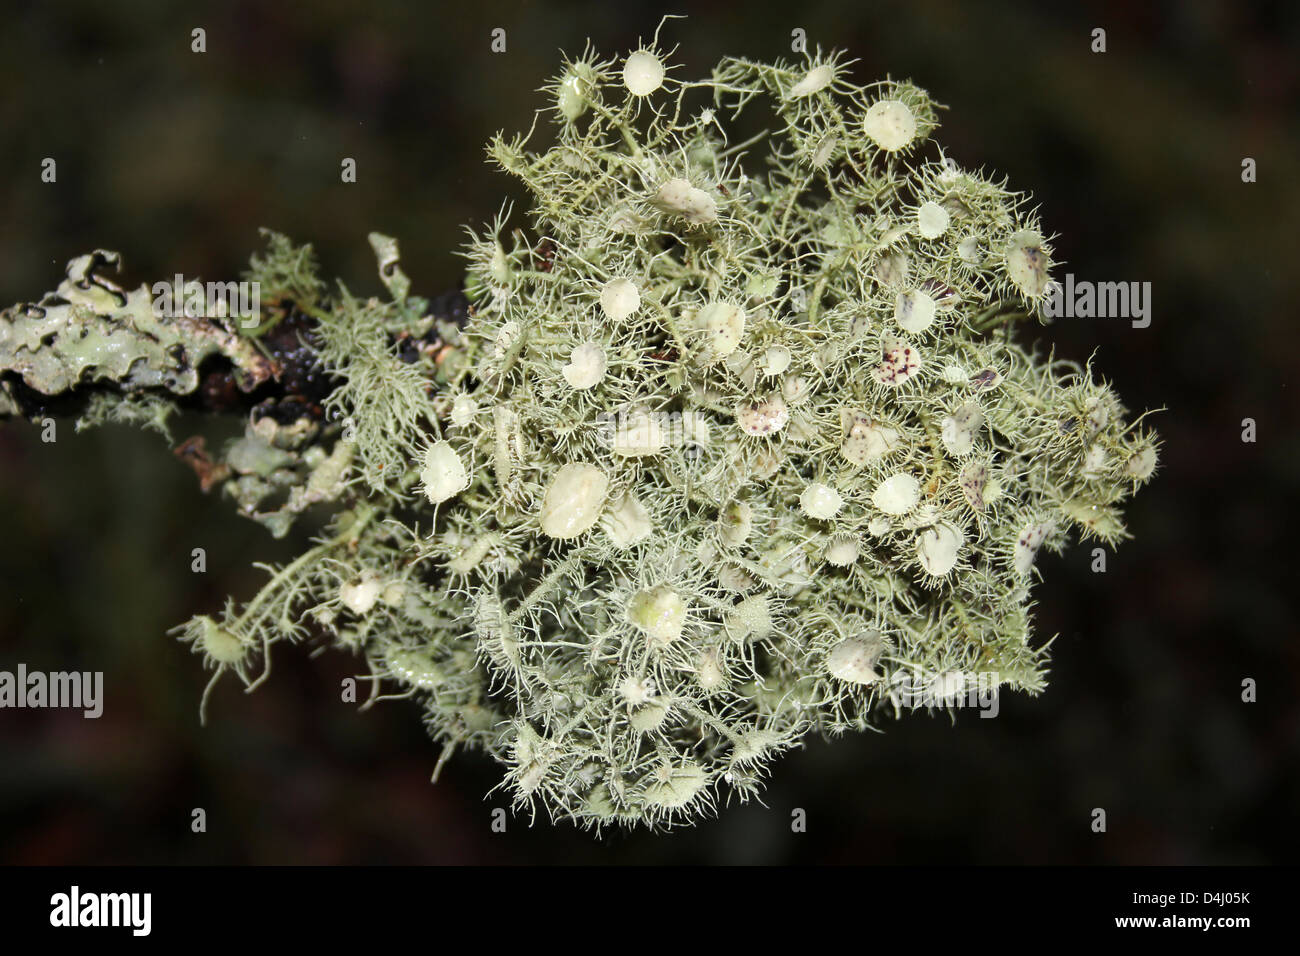 Witches' Whiskers Lichen Usnea florida – the apothecium show branched eyelash cilia Stock Photo